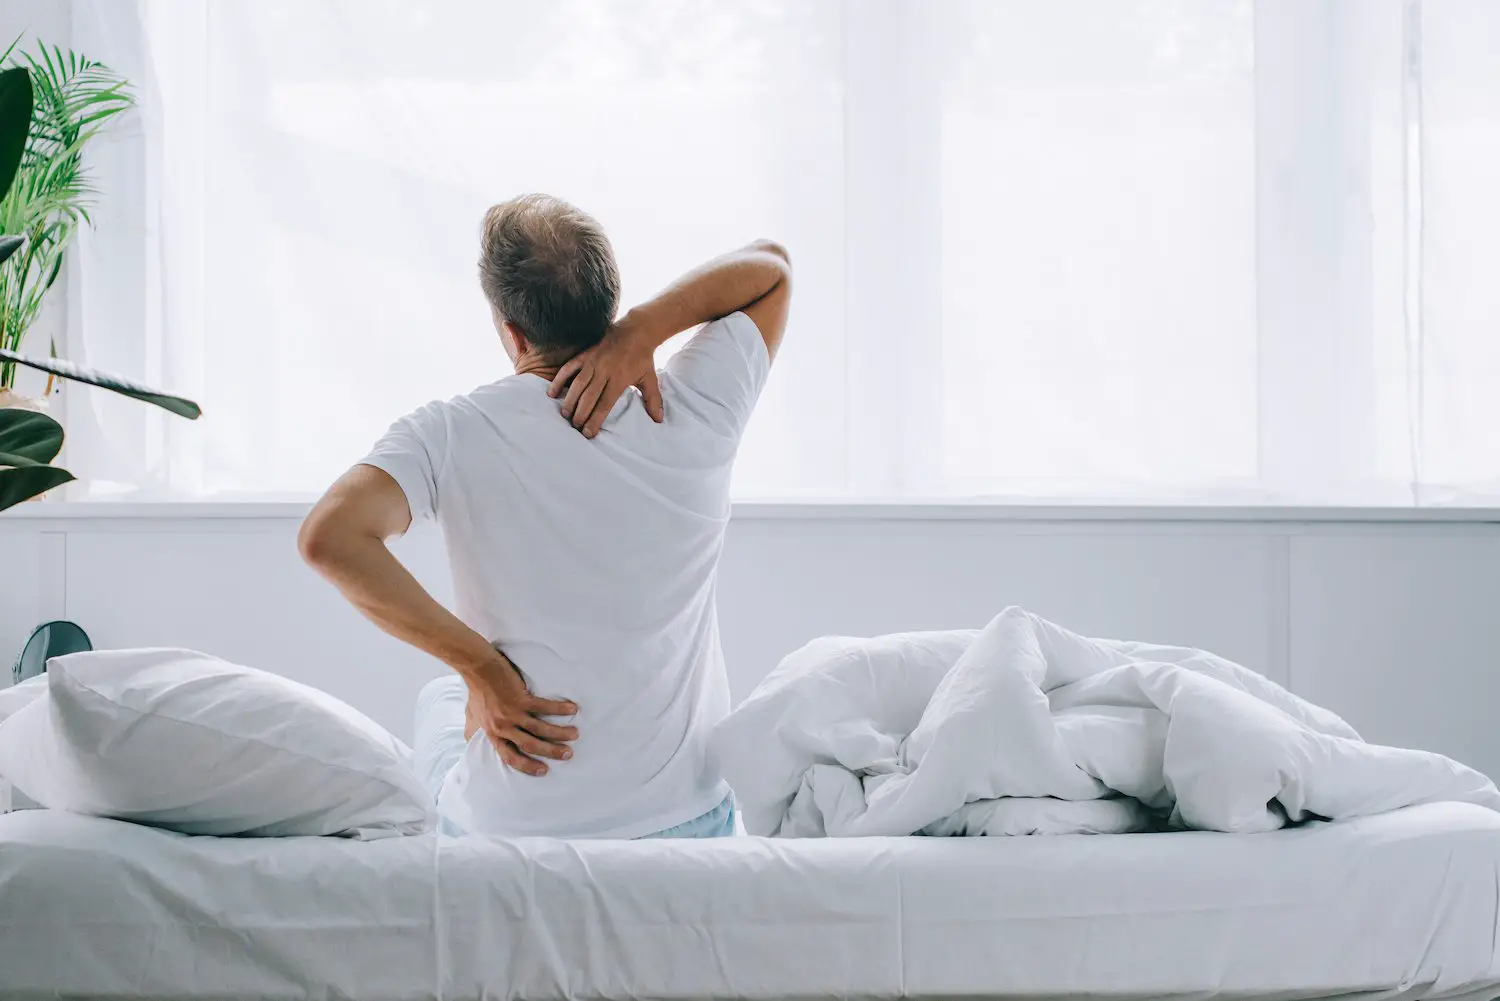 Waking Up with Back Pain: Causes and Tips for Relief